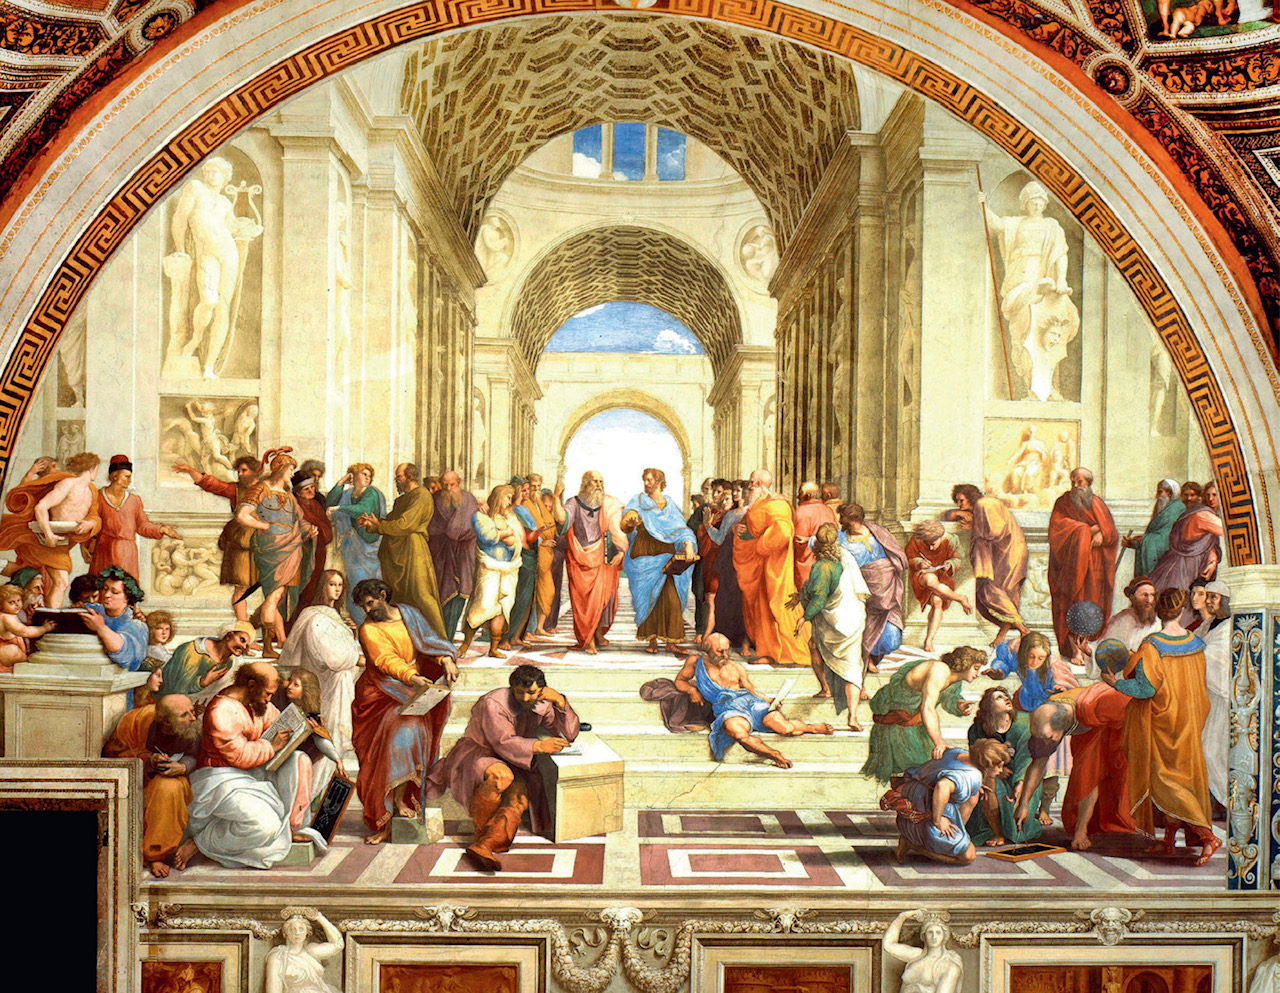 Rubens' painting, "The School of Athens"